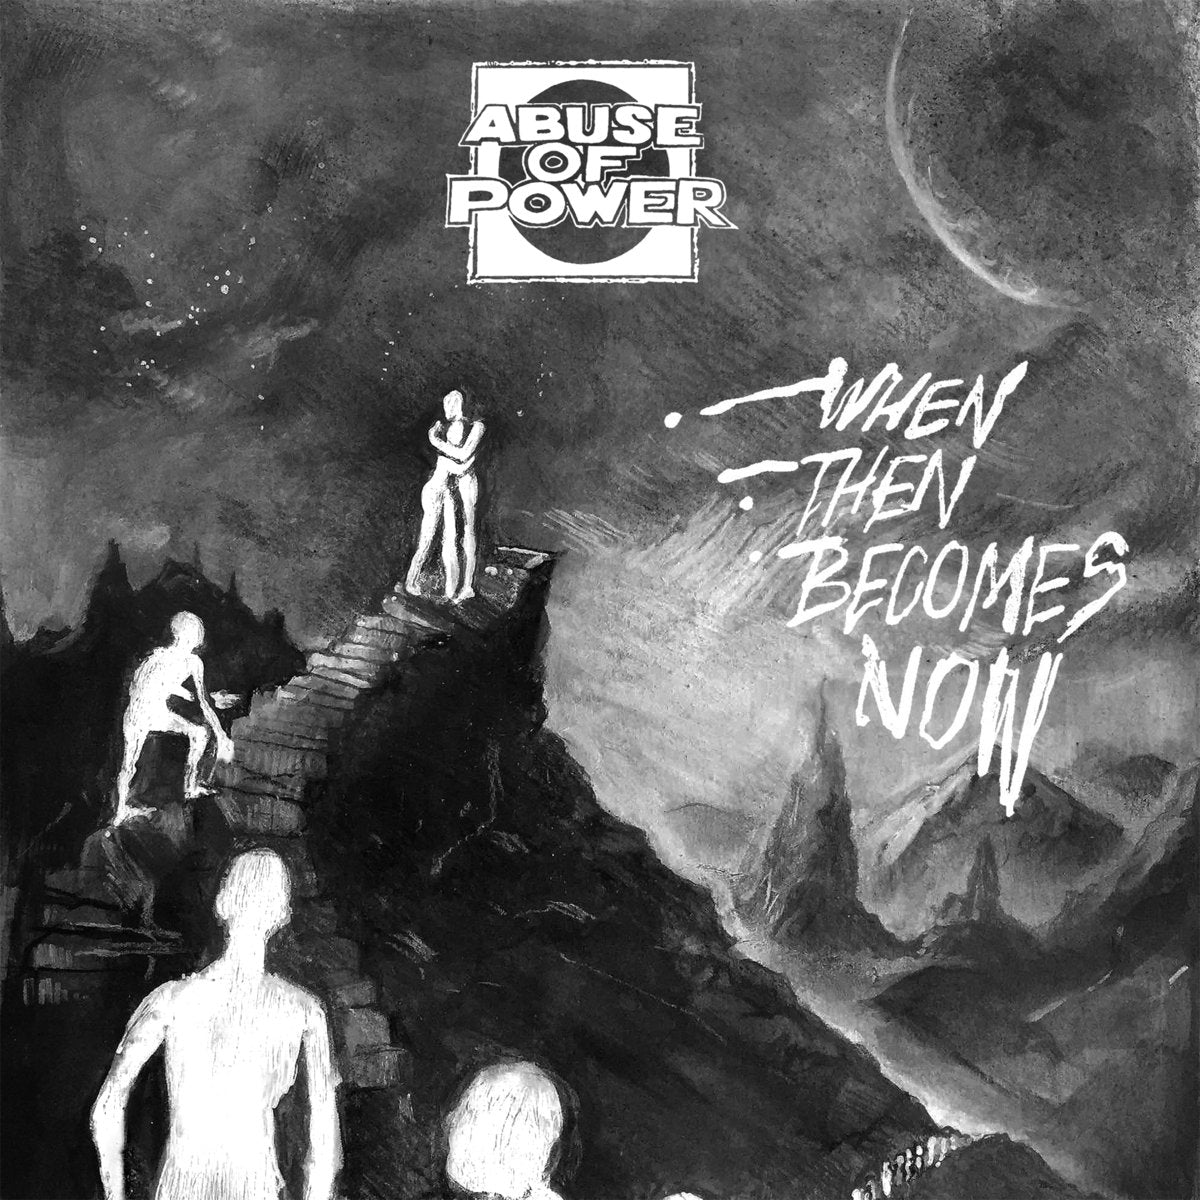 ABUSE OF POWER "When Then Becomes Now" 7"